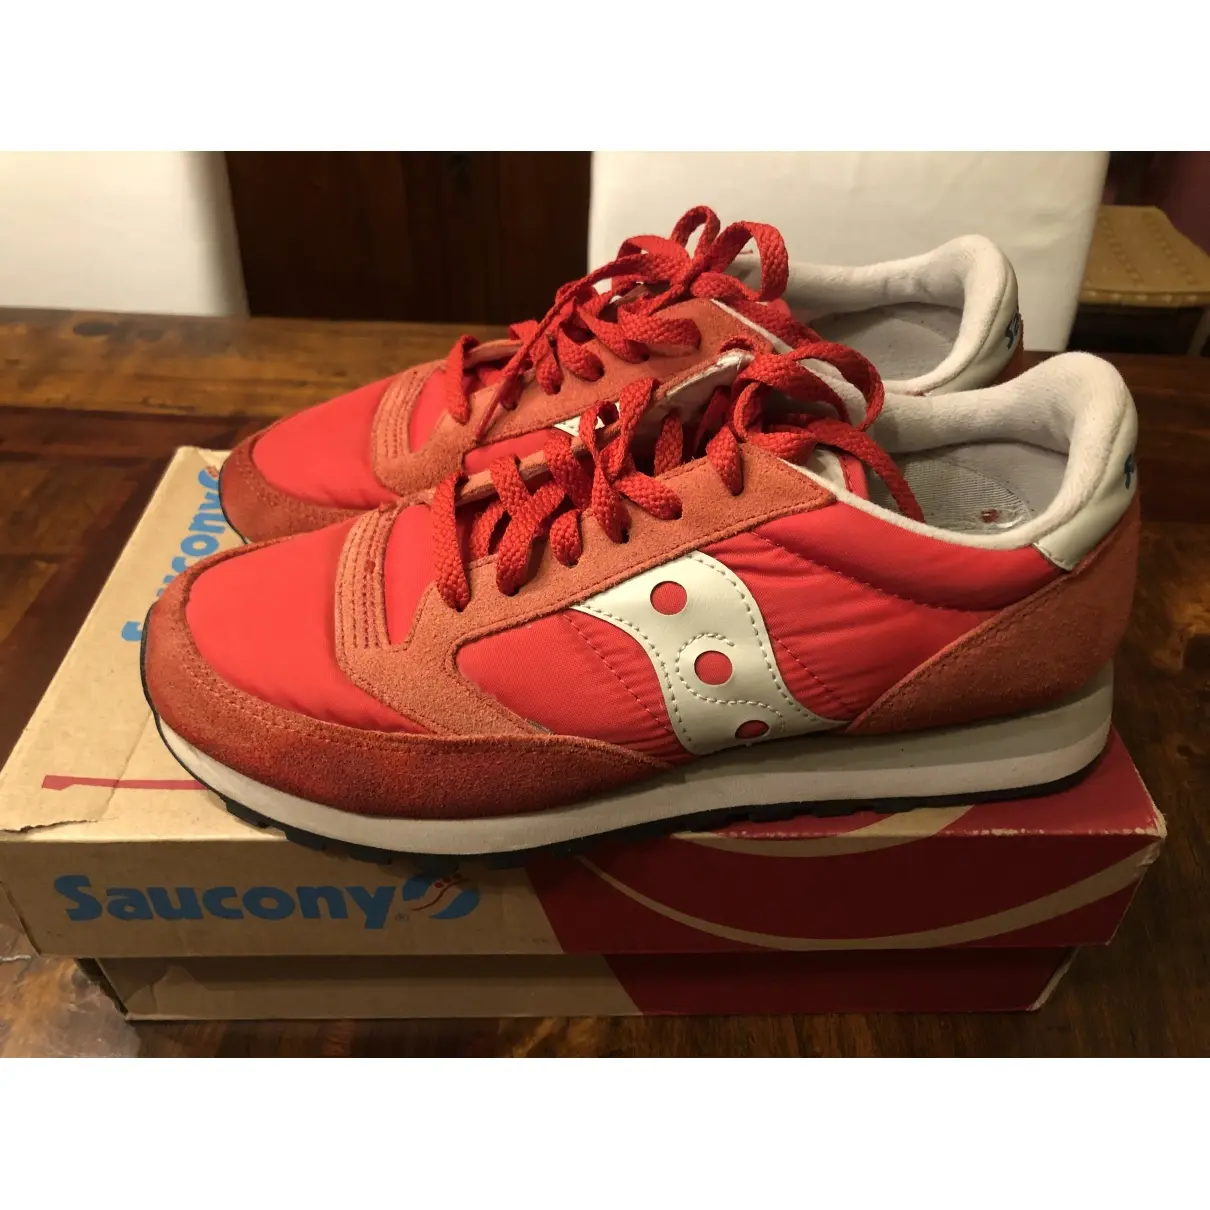 Saucony Cloth trainers for sale